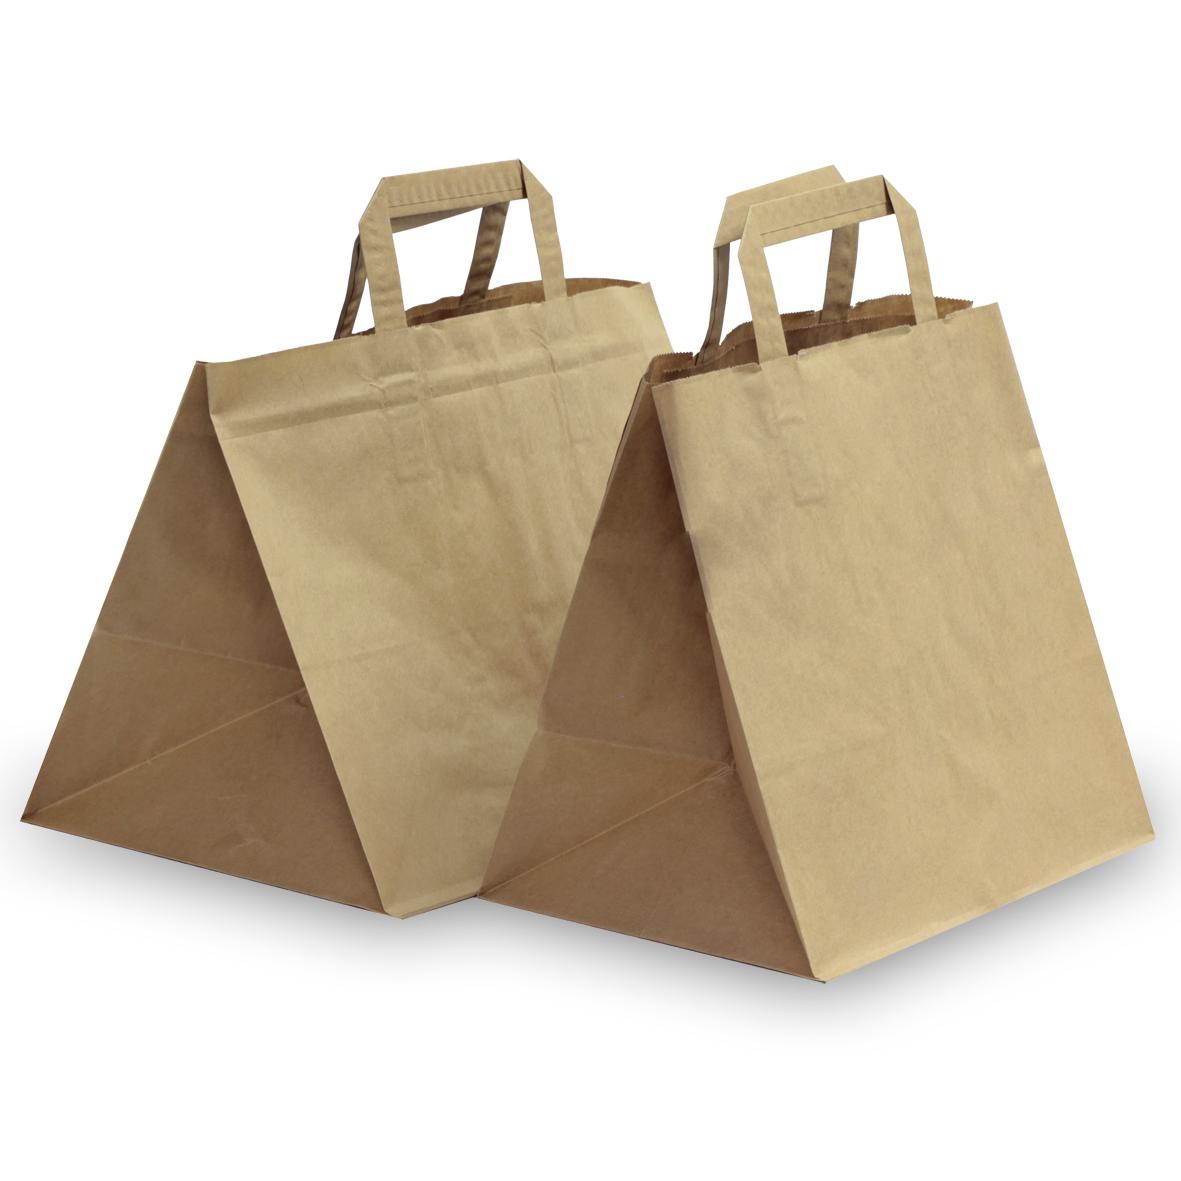 Brown Patisserie Carrier Bags with Flat Handles